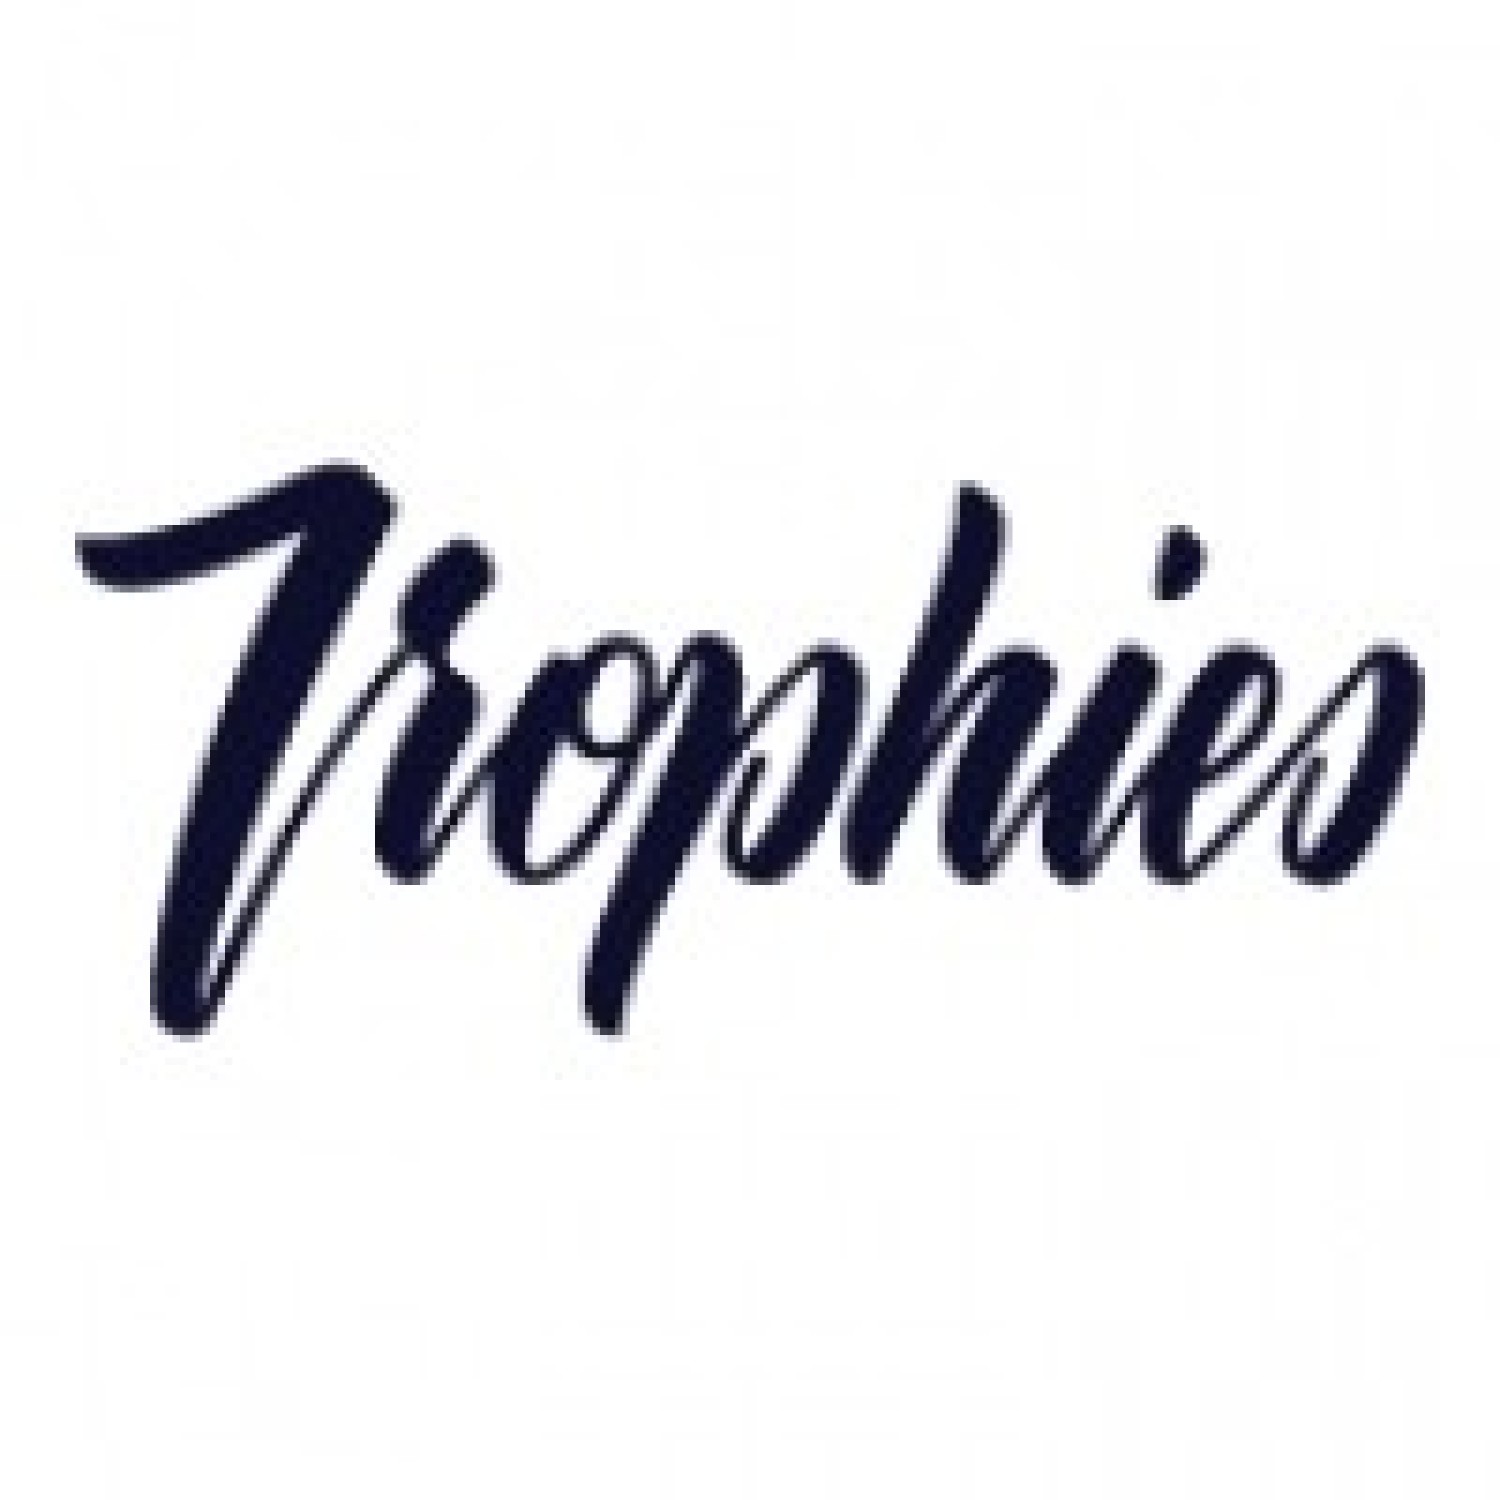 Trophies Events